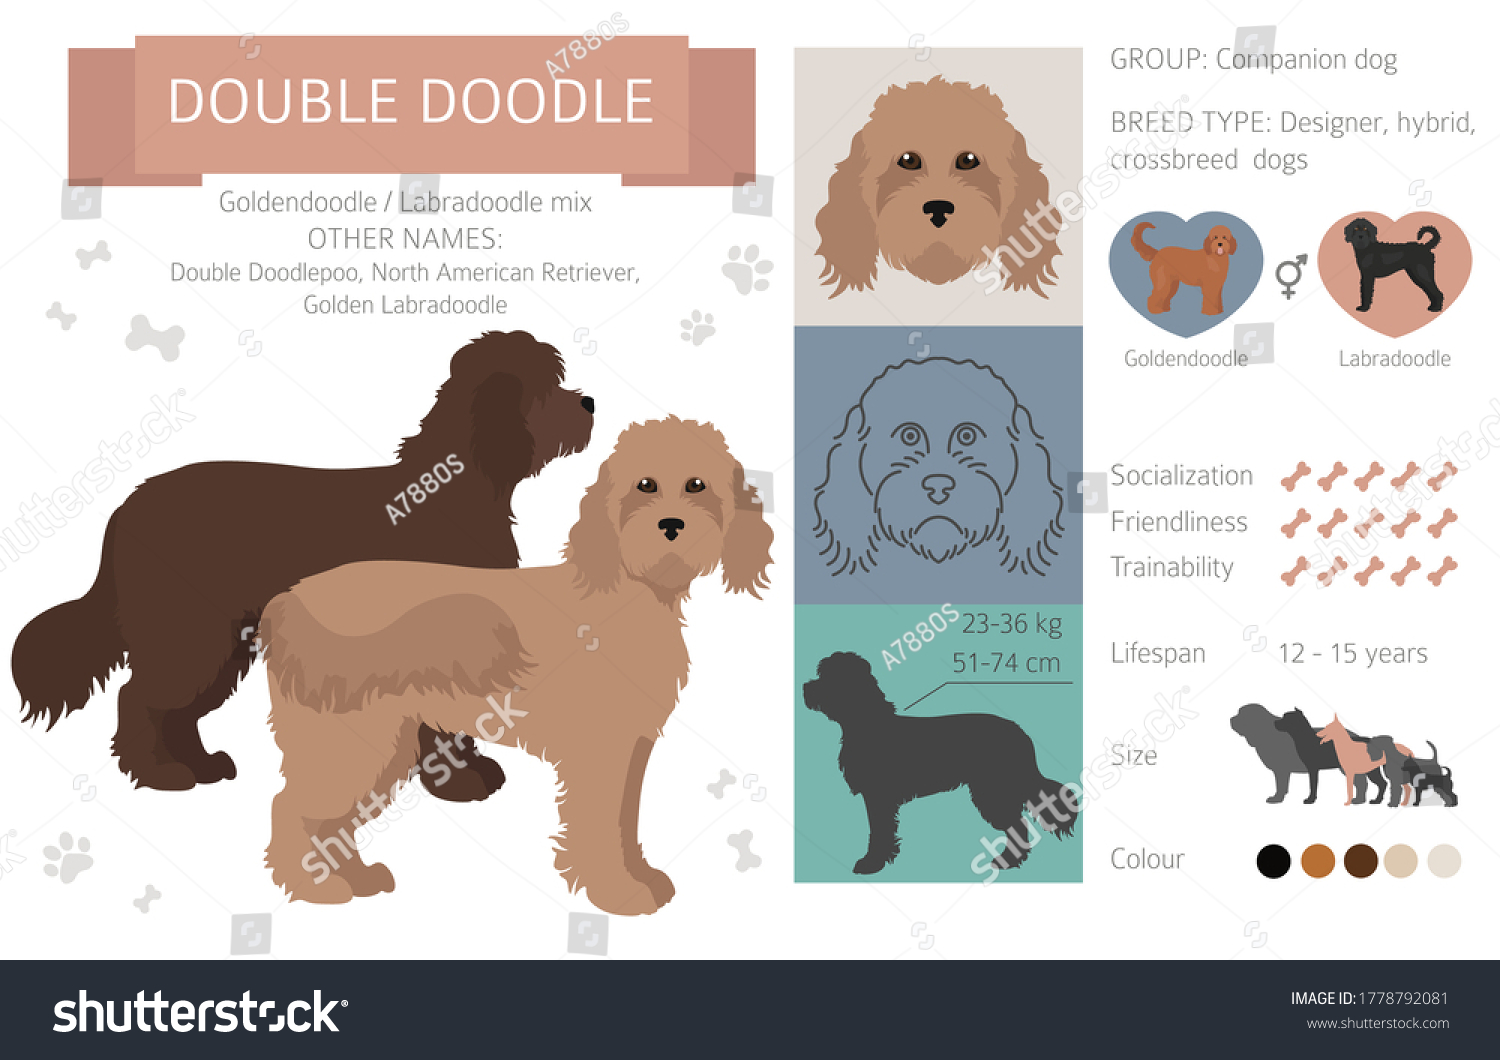 SVG of Designer dogs, crossbreed, hybrid mix pooches collection isolated on white. Double doodle flat style clipart infographic. Vector illustration svg